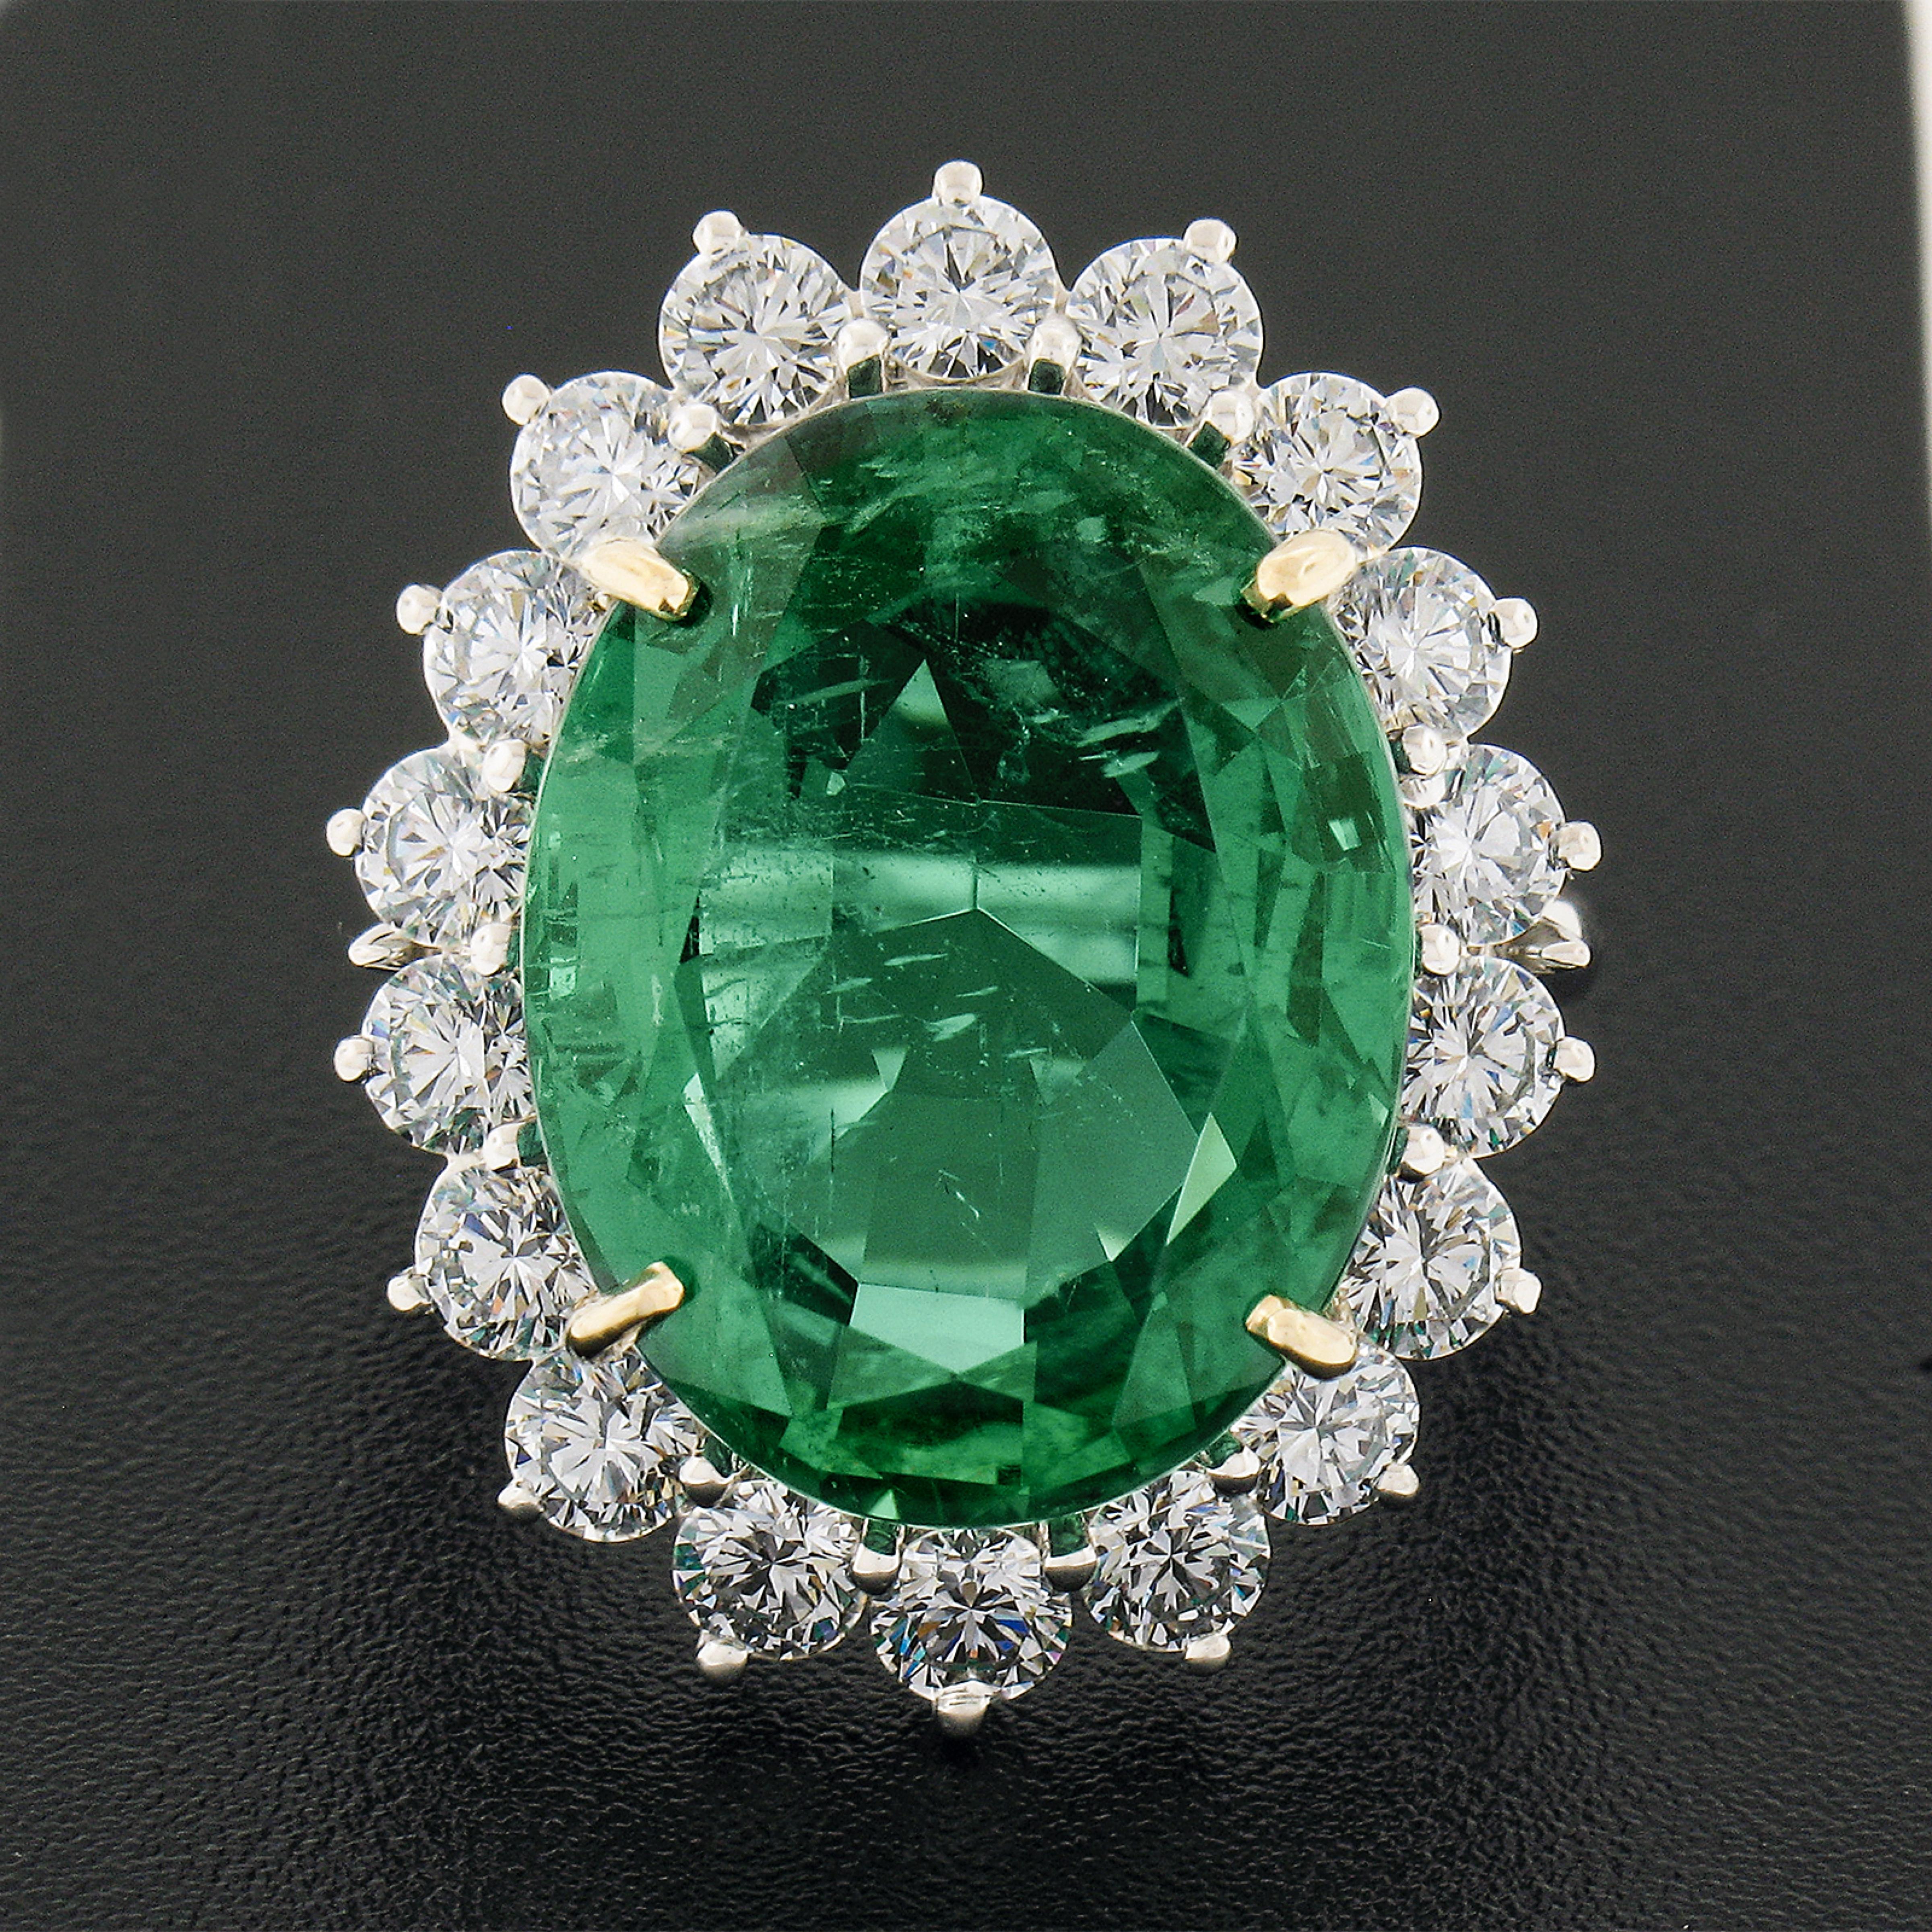 You are looking at a magnificent and truly jaw dropping emerald and diamond fancy cocktail statement ring crafted in solid platinum, featuring a large, oval cut, genuine emerald stone neatly prong set in solid 18k yellow gold at the center of the